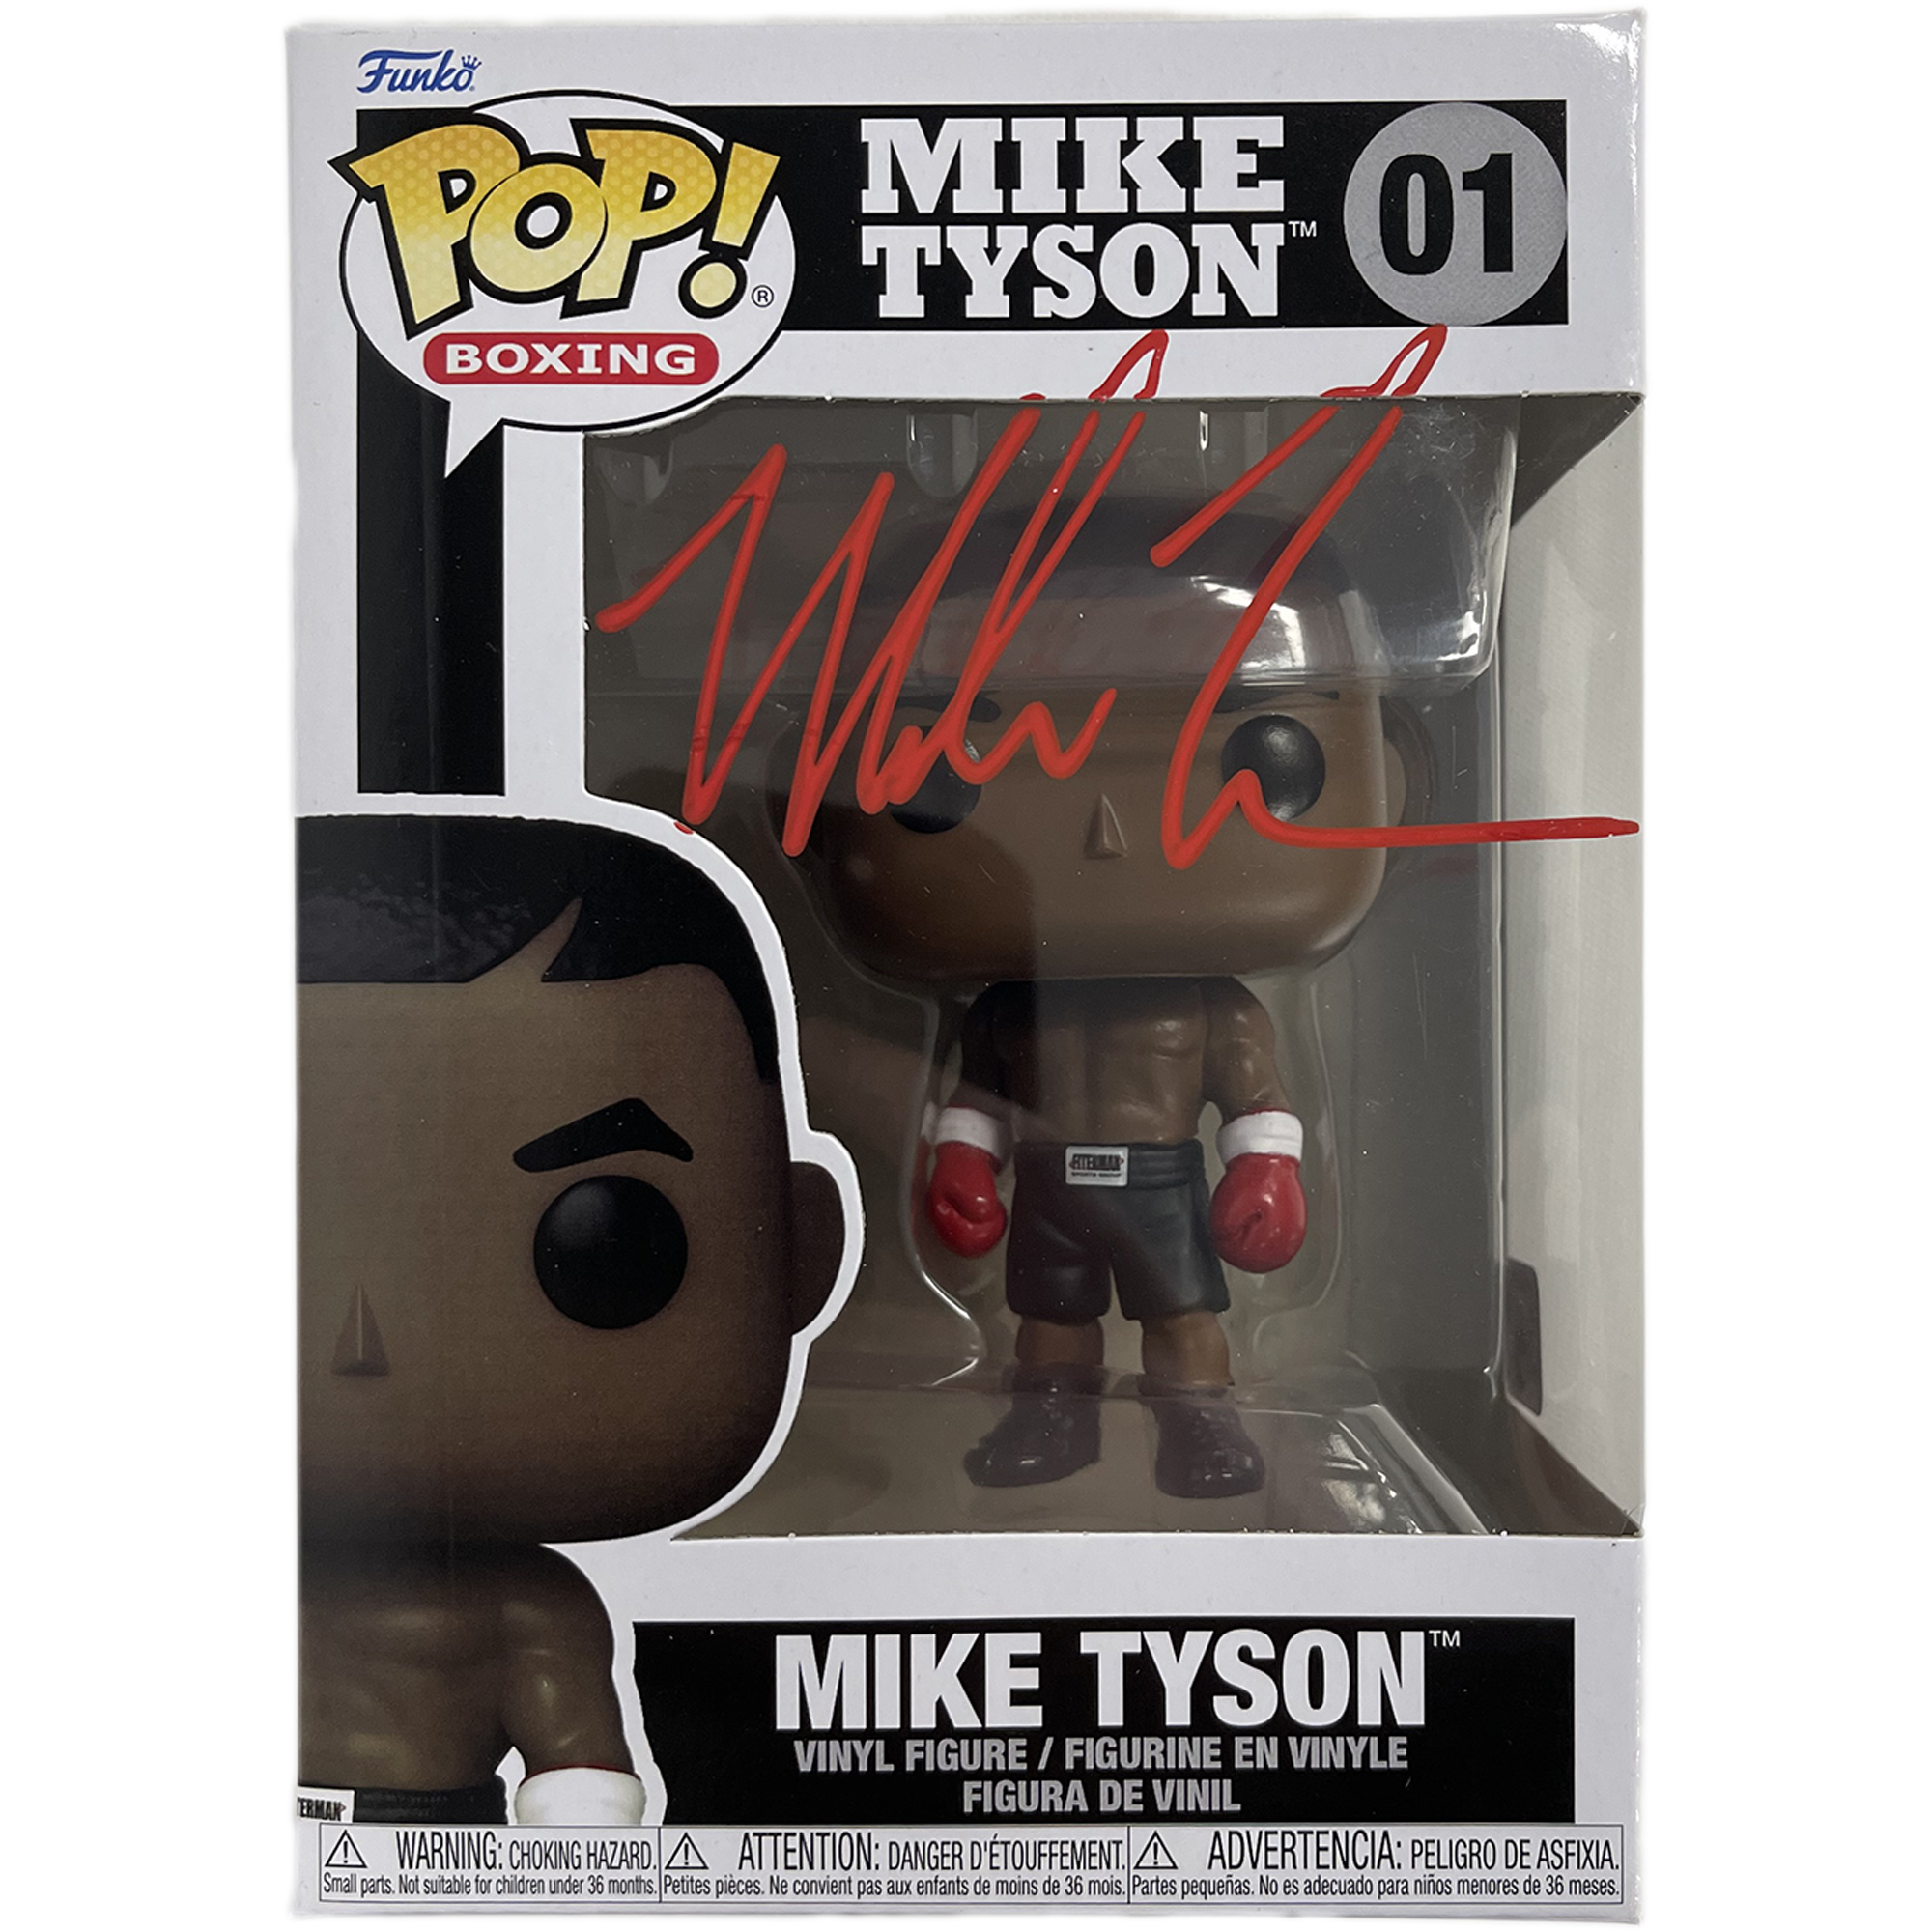 Mike Tyson – “Boxing” Mike Tyson #01 Autographed Fun...